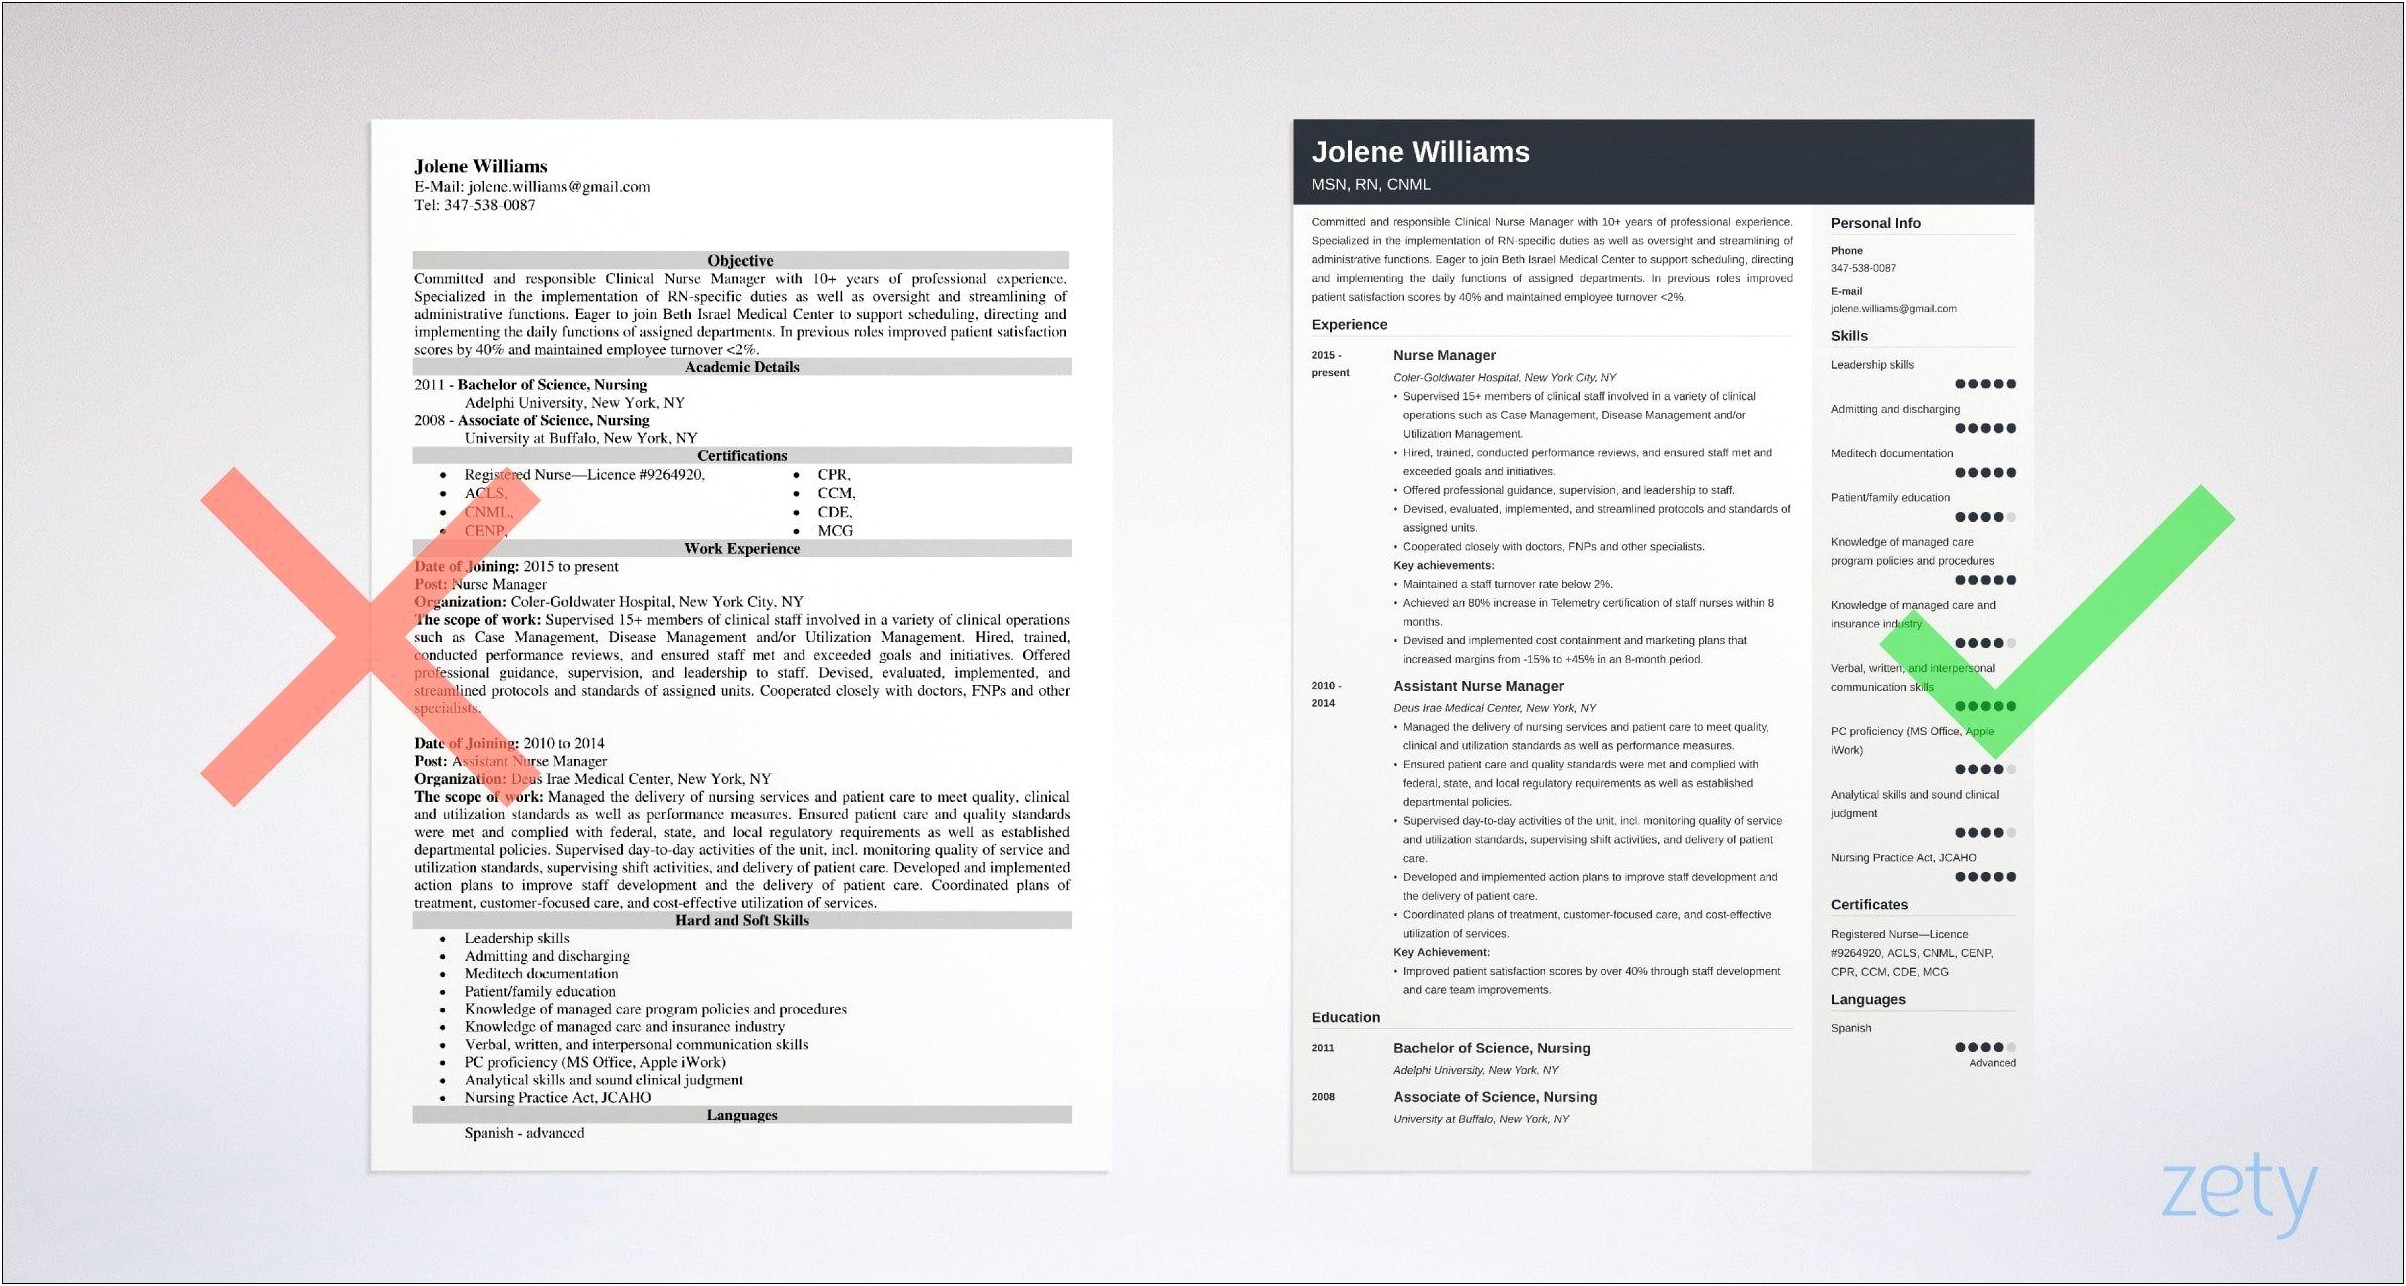 Examples Of Functional Resume Nurse Manager